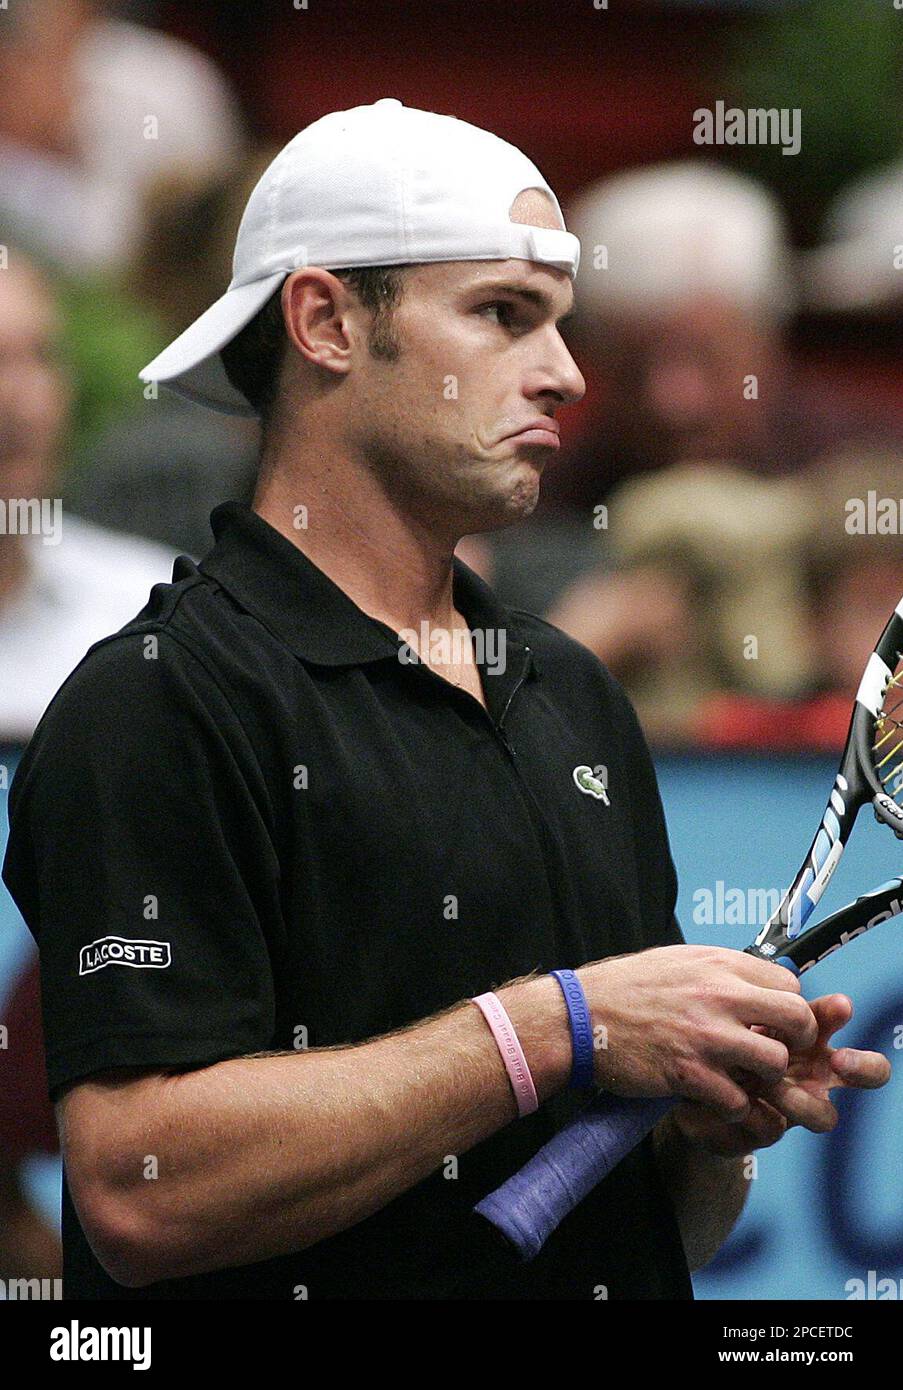 U.S. player Andy Roddick reacts during the match against Austria's Juergen  Melzer at the ATP BA-CA tennis trophy in Vienna, Friday, Oct. 13, 2006. (AP  Photo/Hans Punz Stock Photo - Alamy